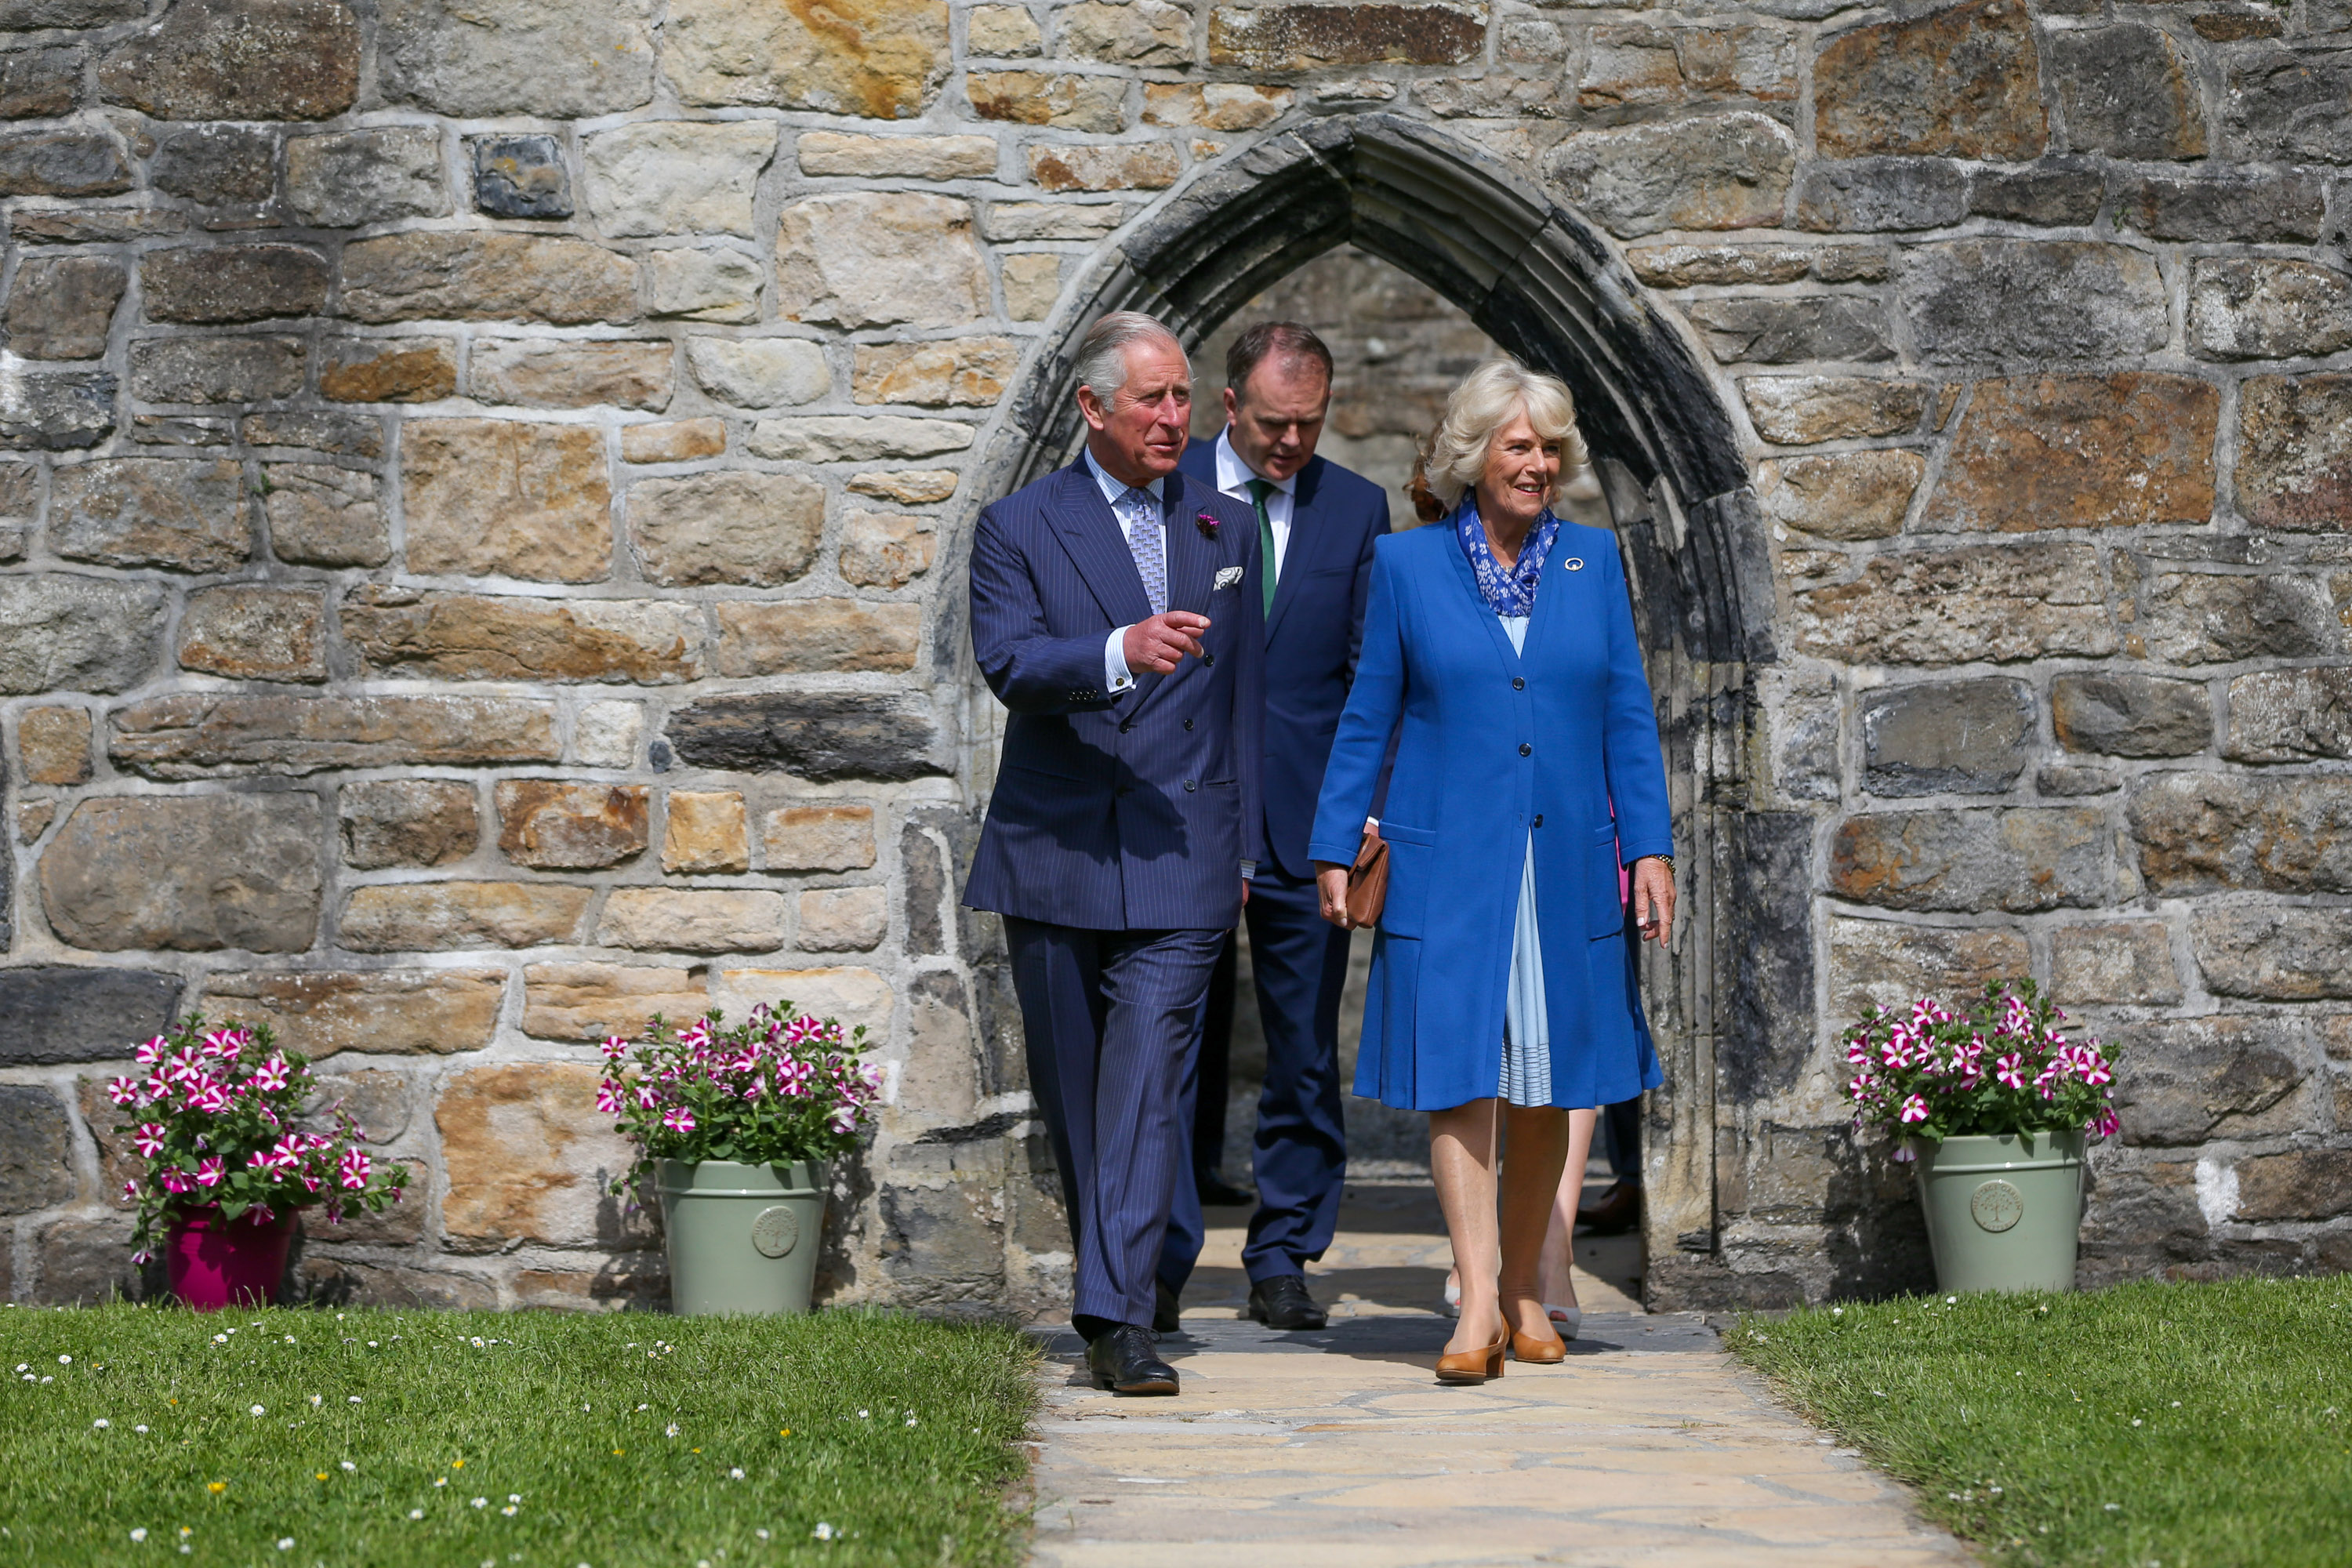 MAXWELLS DUBLIN, IRELAND Visit to Ireland by The Prince of Wales and the Duchess of Cornwall. Donegal, Ireland. Pic Shows: HRH The Prince of Wales and the Duchess of Cornwall at  Donegal Castle.  PIC: NO FEE, MAXWELLPHOTOGRAPHY.IE